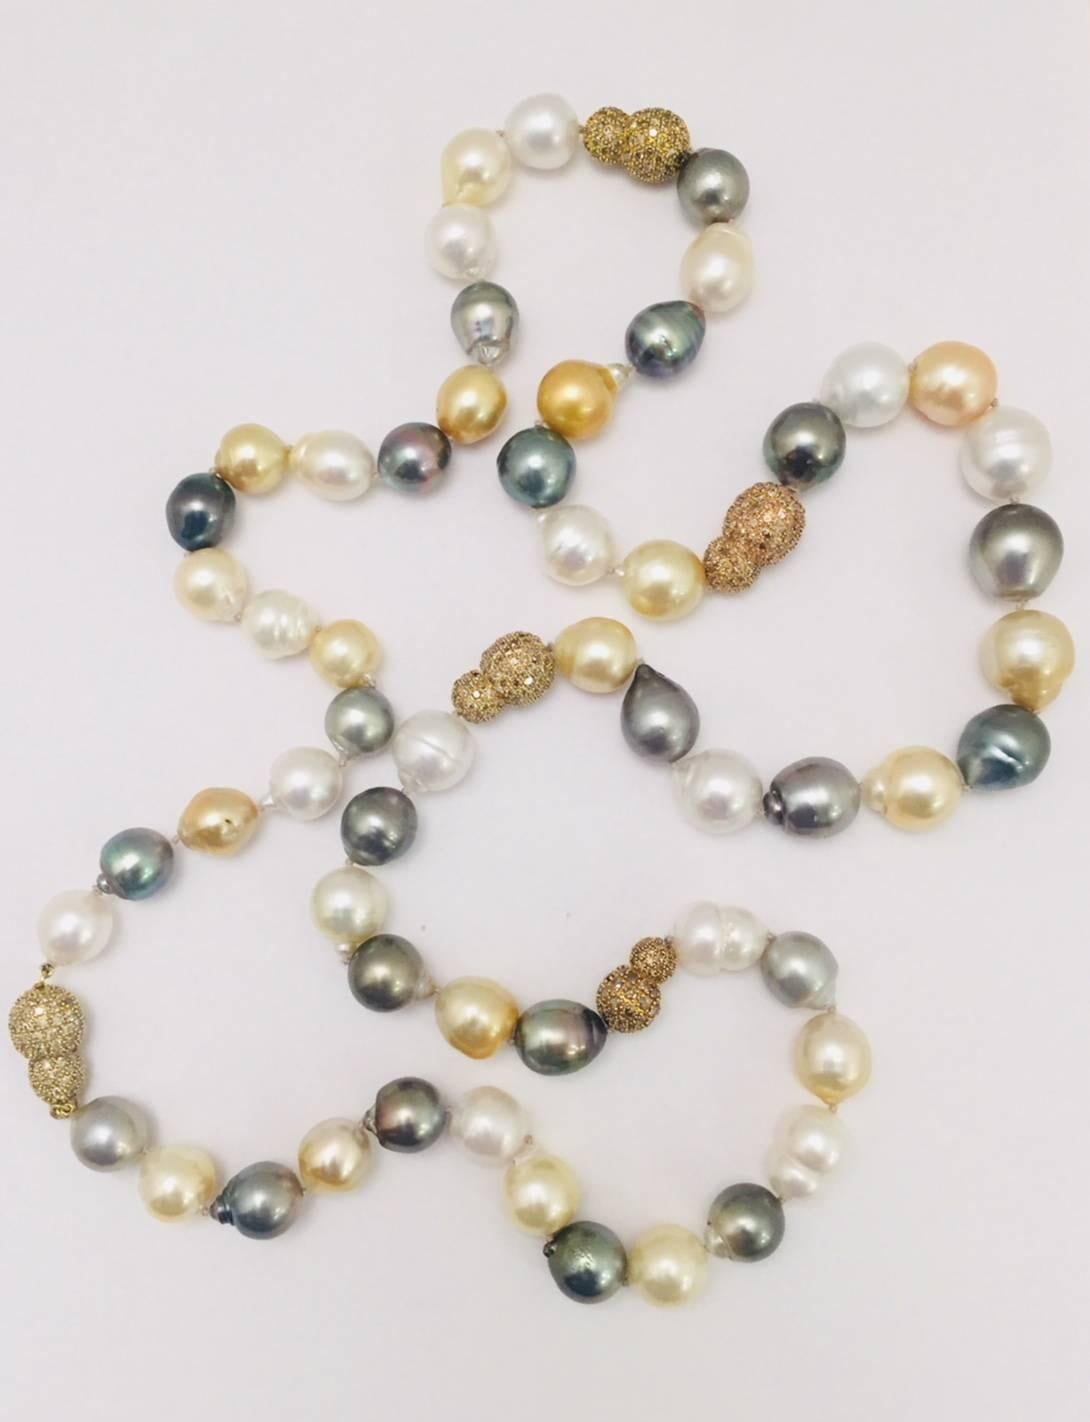 Magnificent, unique necklace features Baroque Pearls in a multitude of alluring colors, including white, black and even gold!  Five 18K Yellow Gold and pave diamond stations are inspired by the natural beauty and shape of the 46 irregular pearls